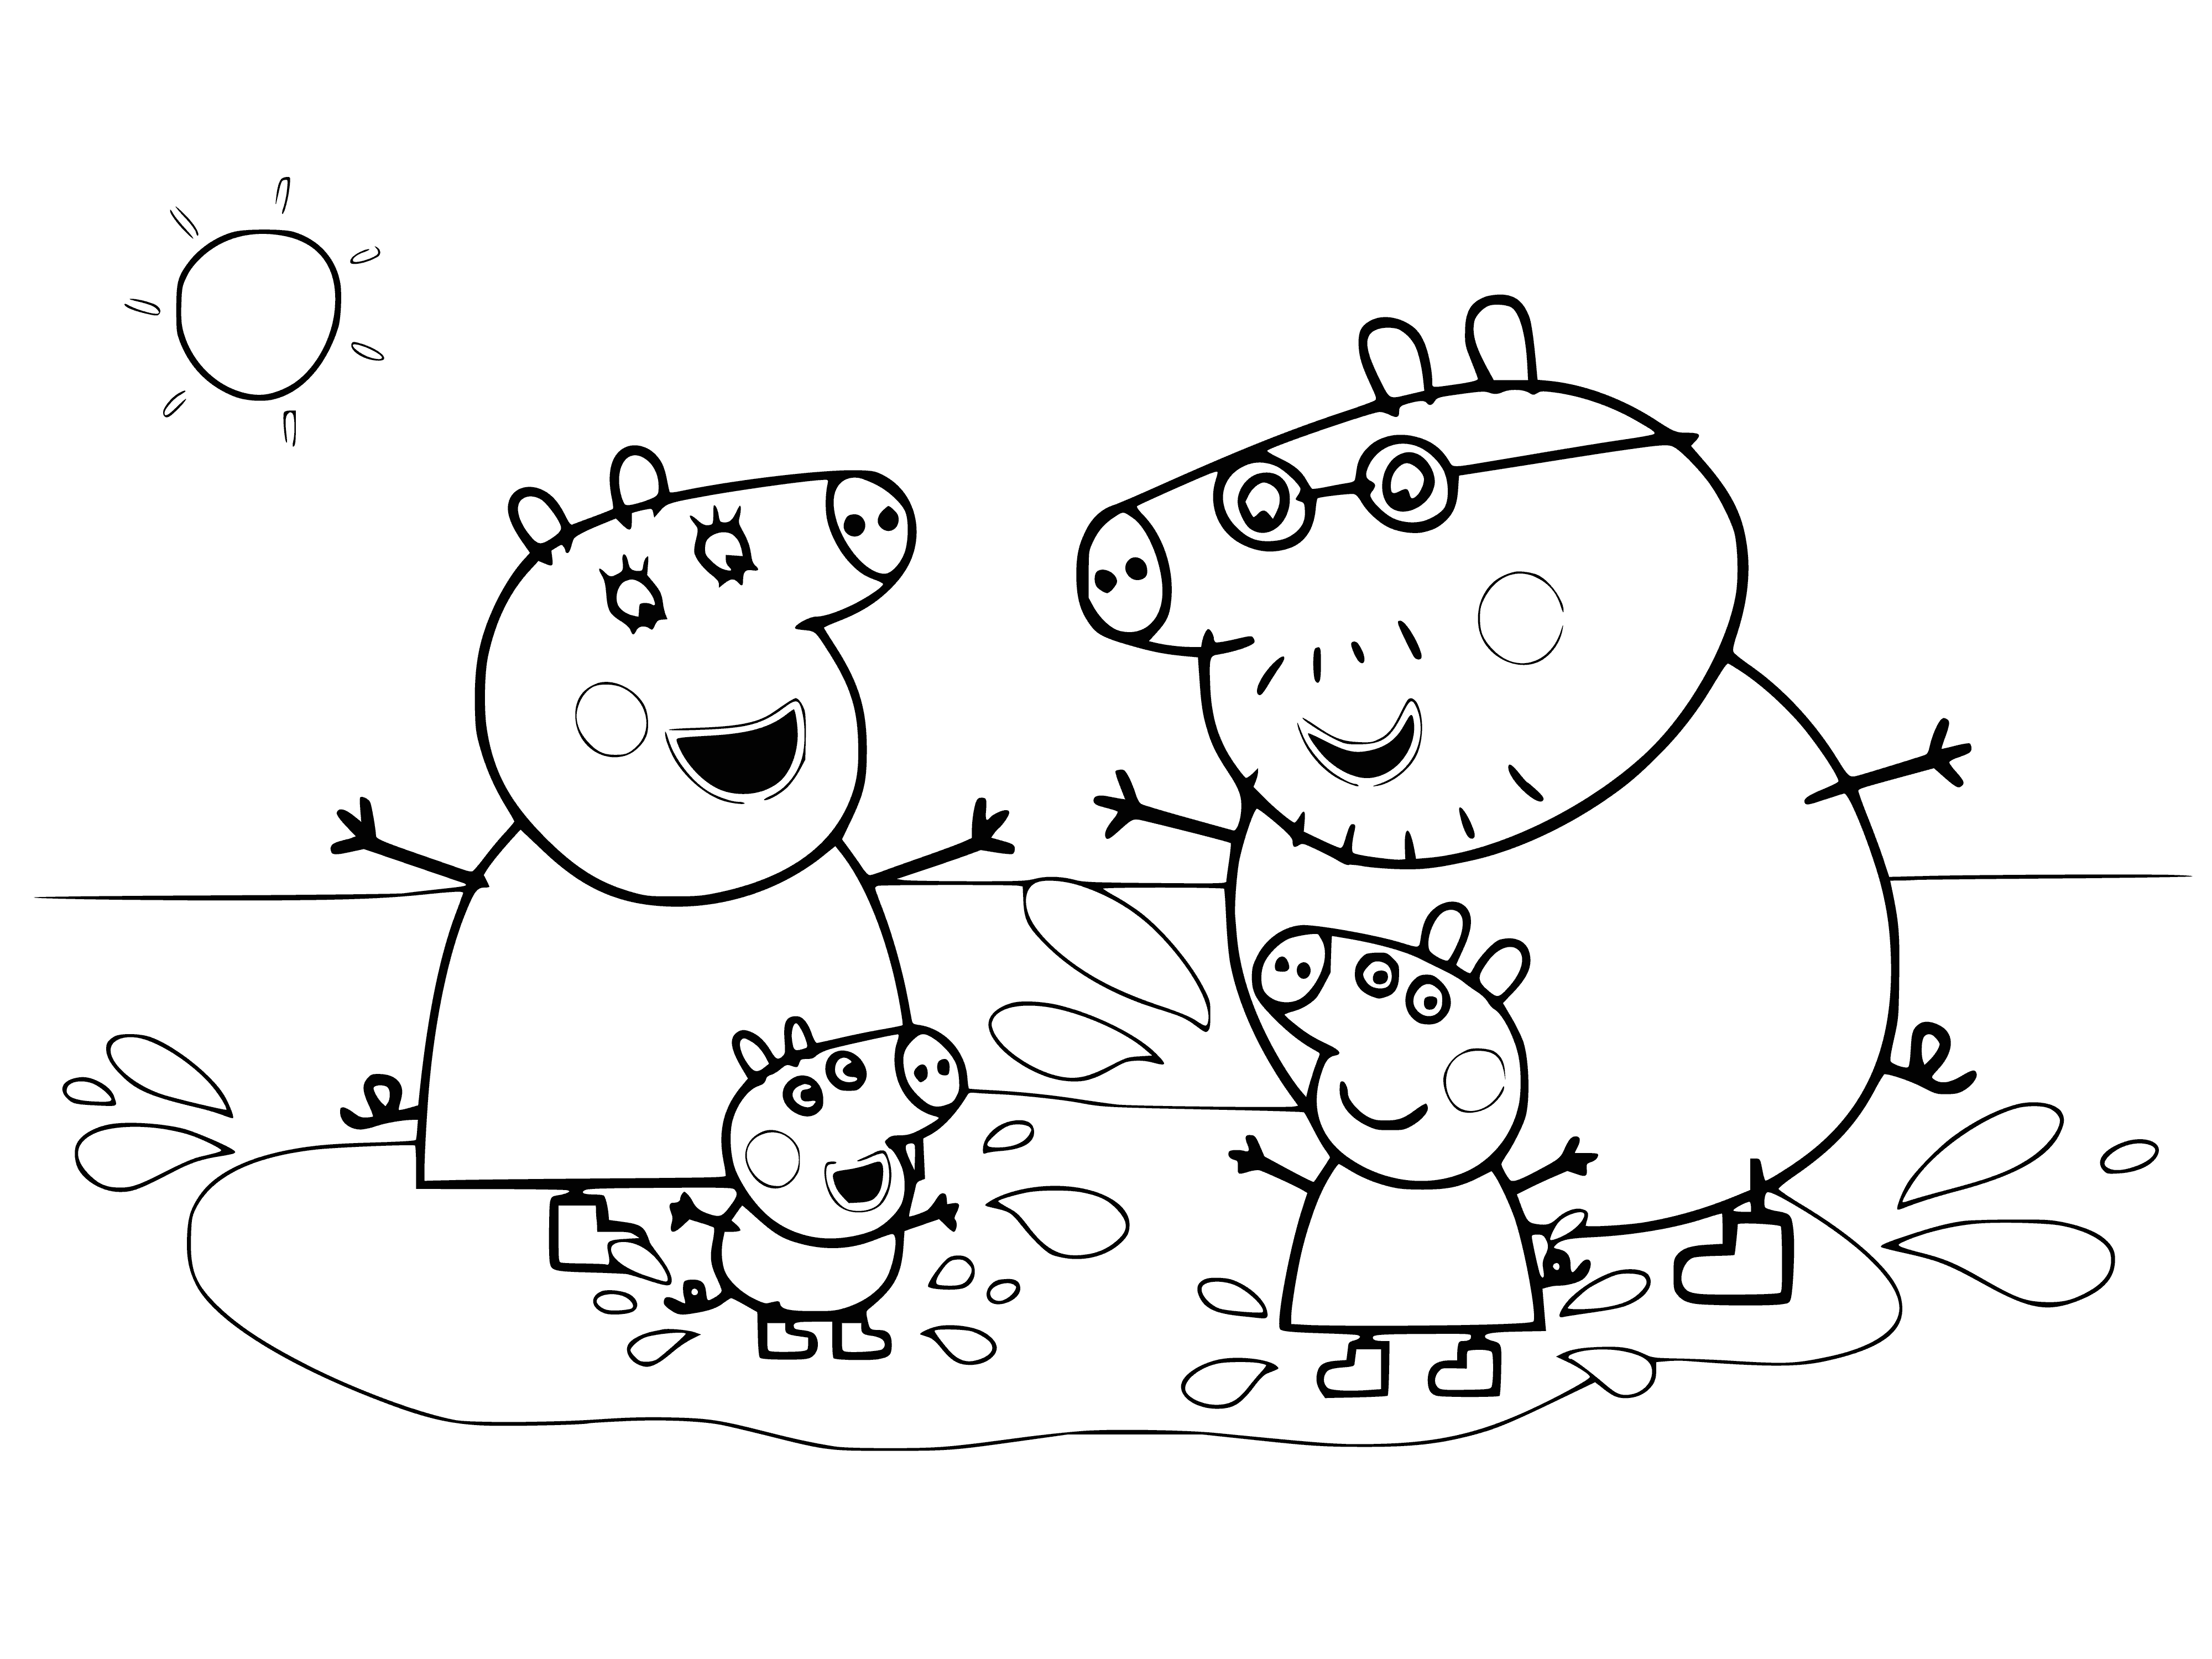 coloring page: Peppa Pig is playing in the rain with her raincoat & boots, splashing in the puddles and having fun.